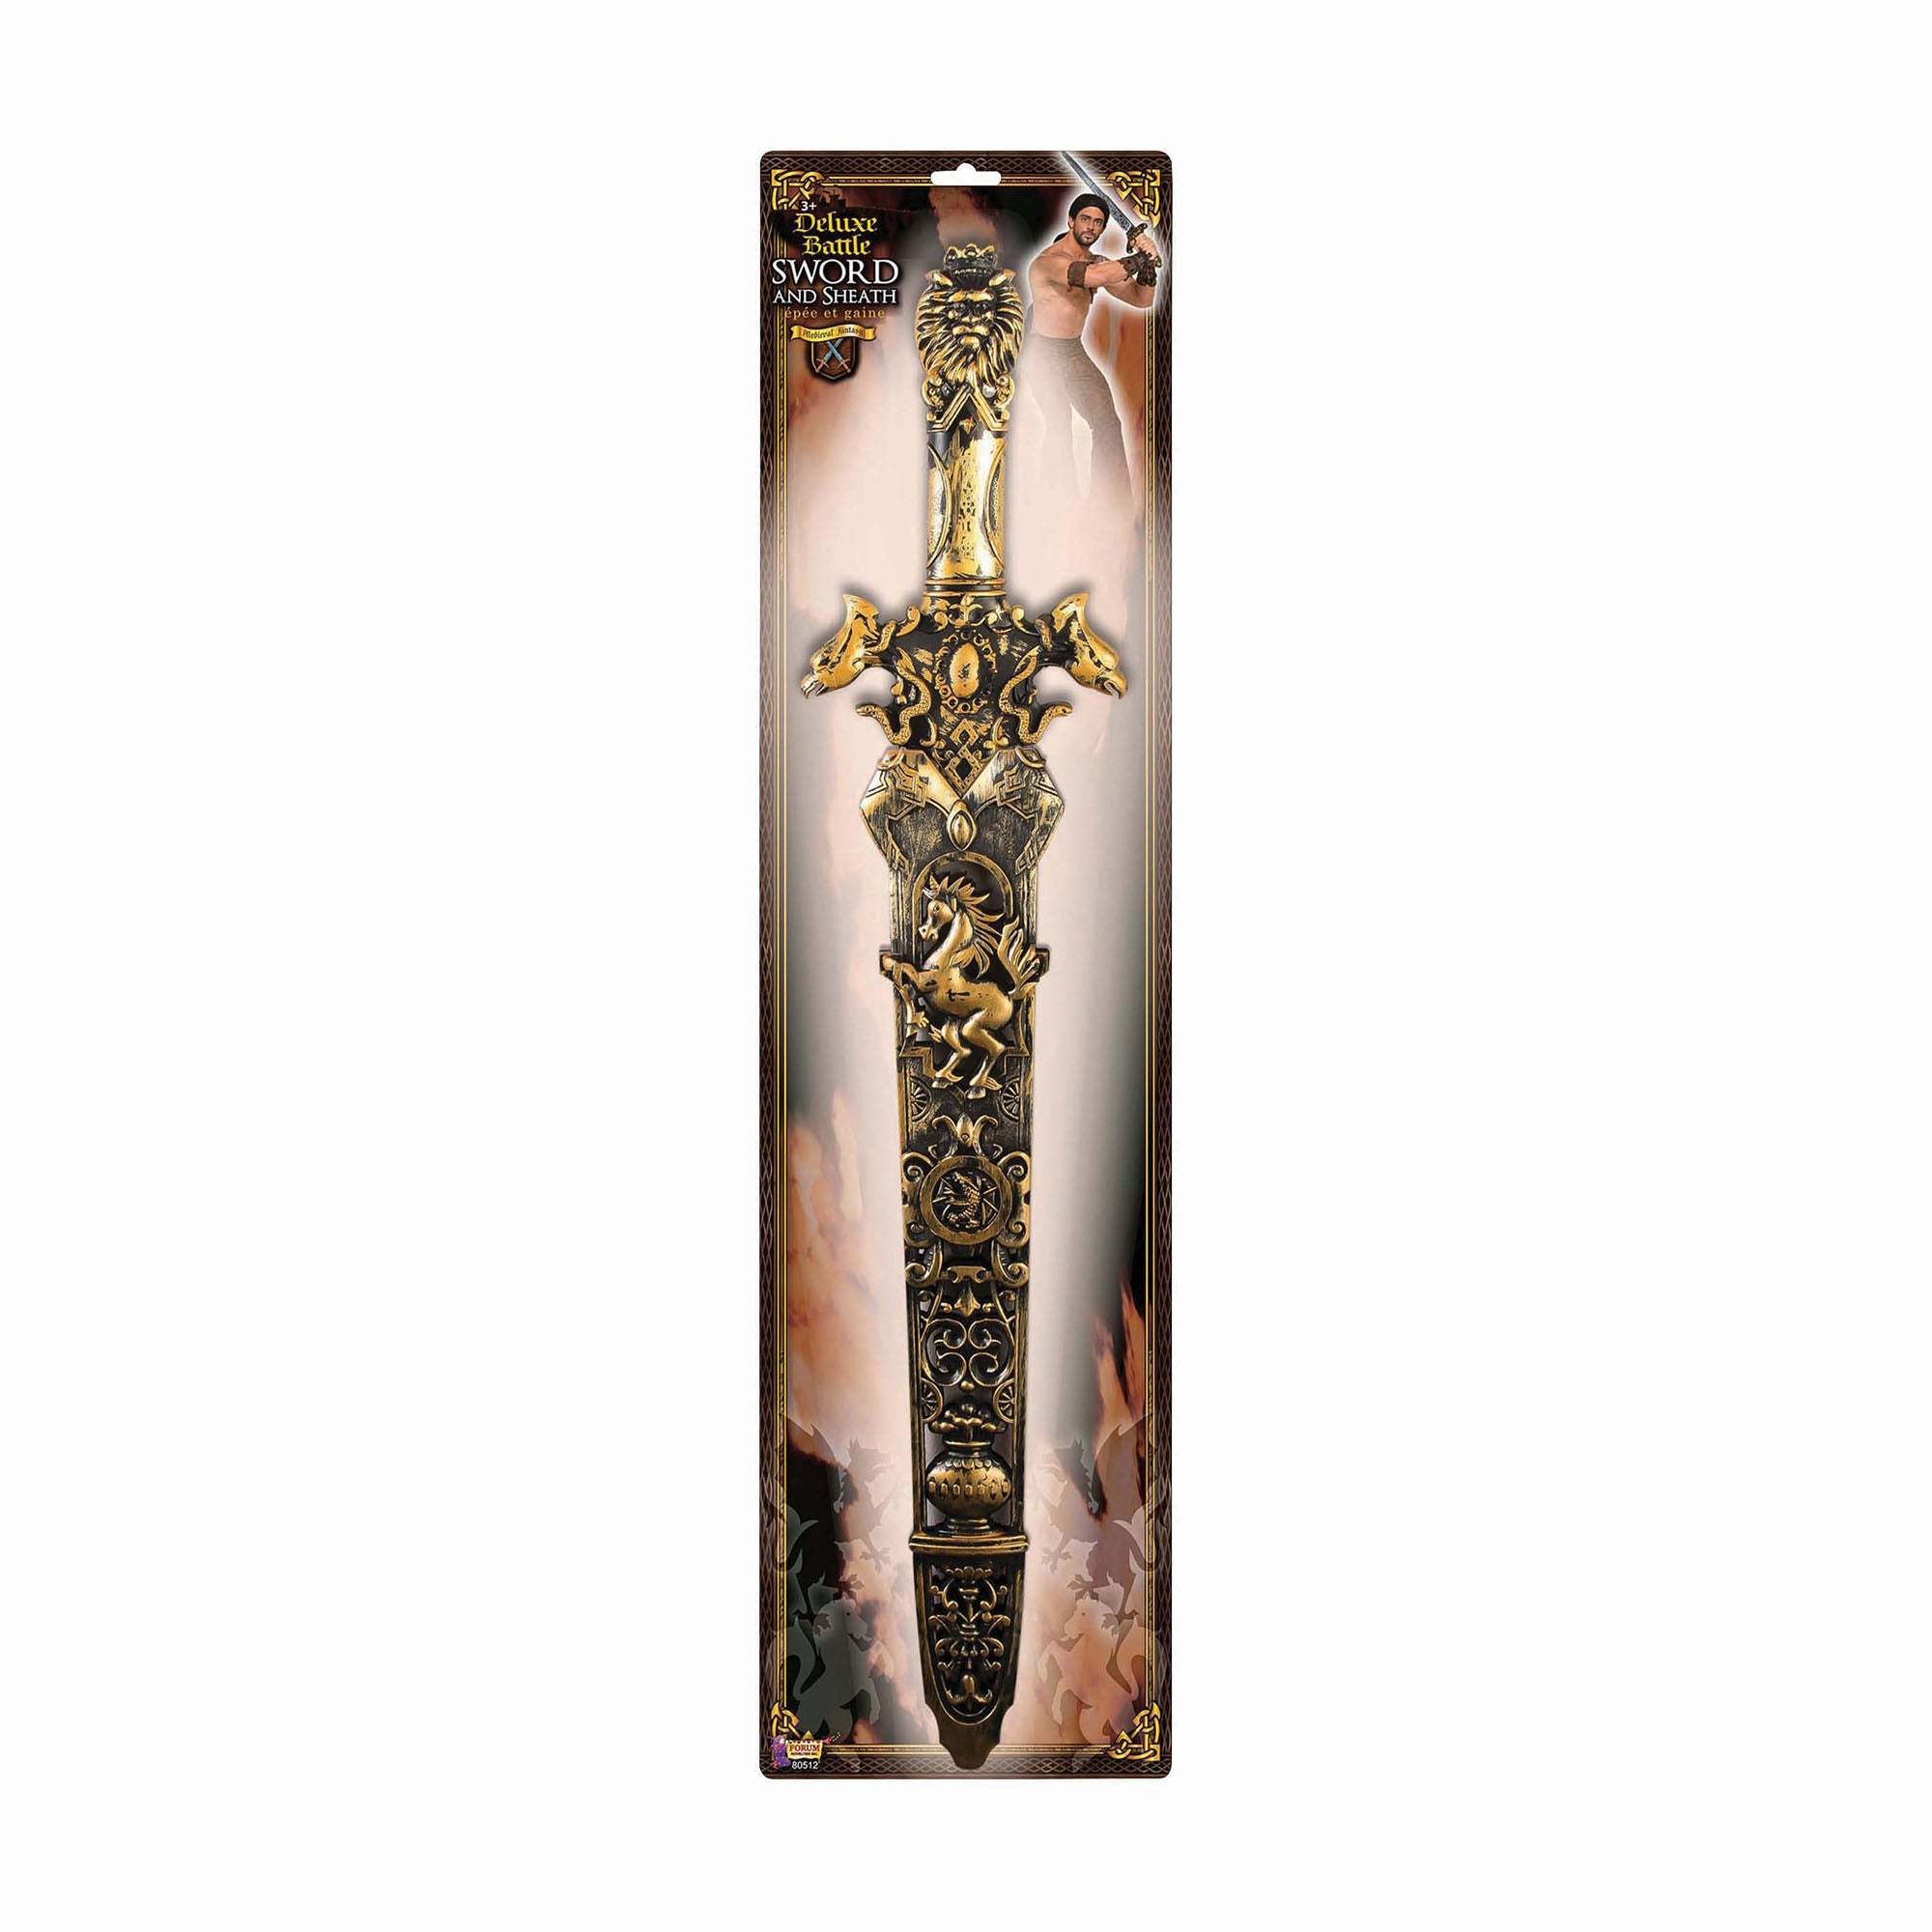 Battle Great Sword and Sheath Costume Accessory